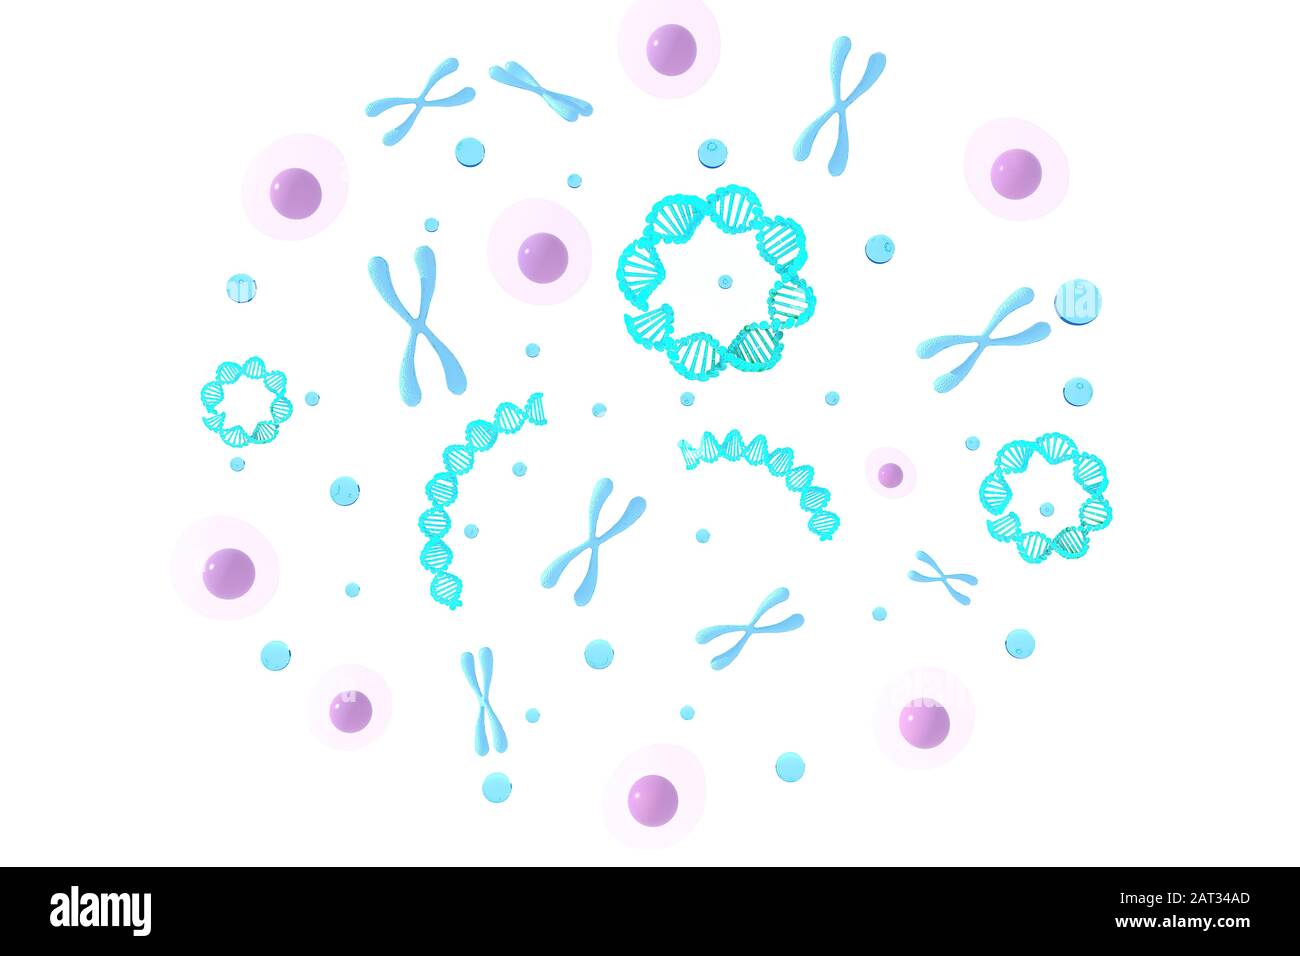 3d rendering of Chromosome Abstract Scientific Background, 3d illustration. Stock Photo